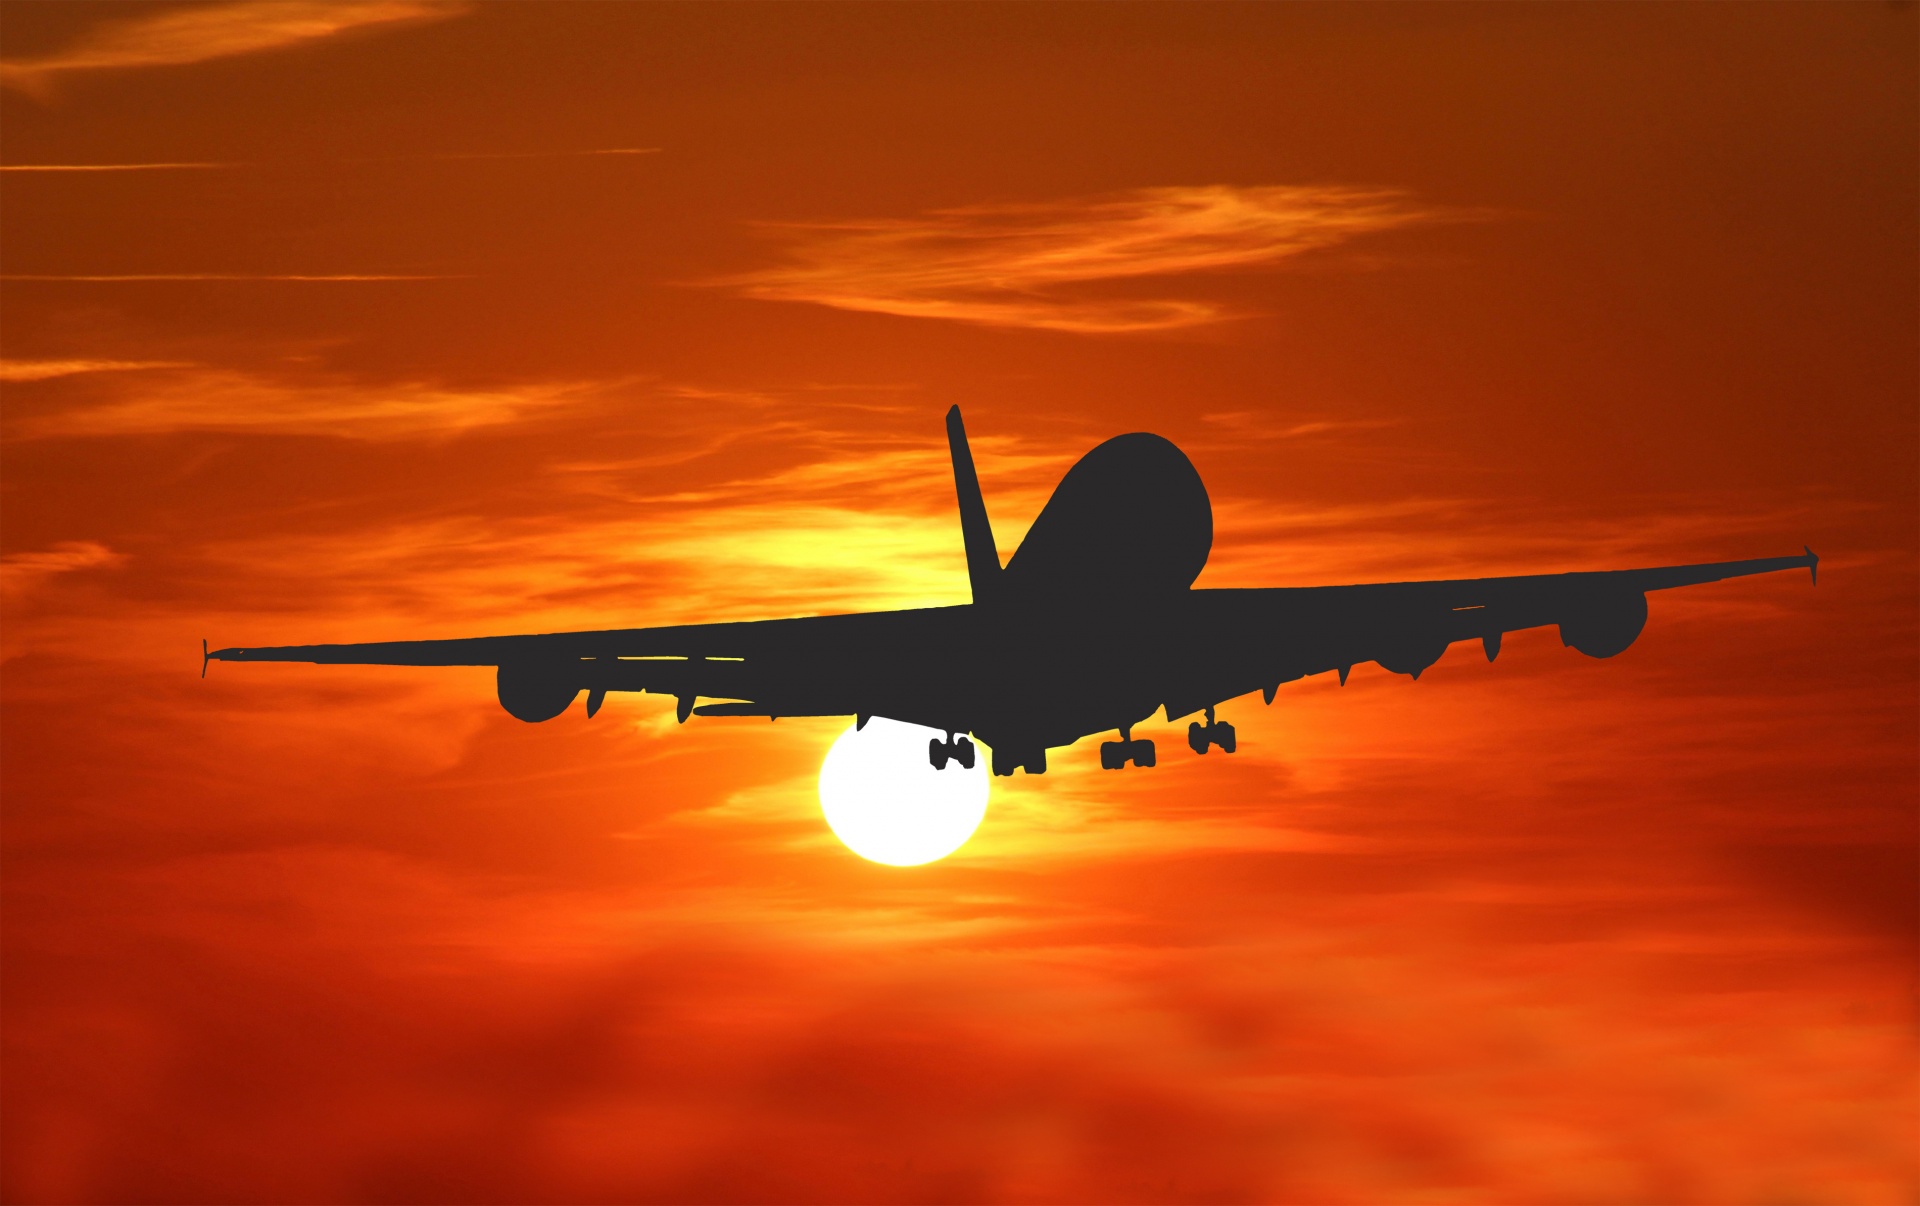 The silhouette of a commercial aircraft backed by a vivid sunset.